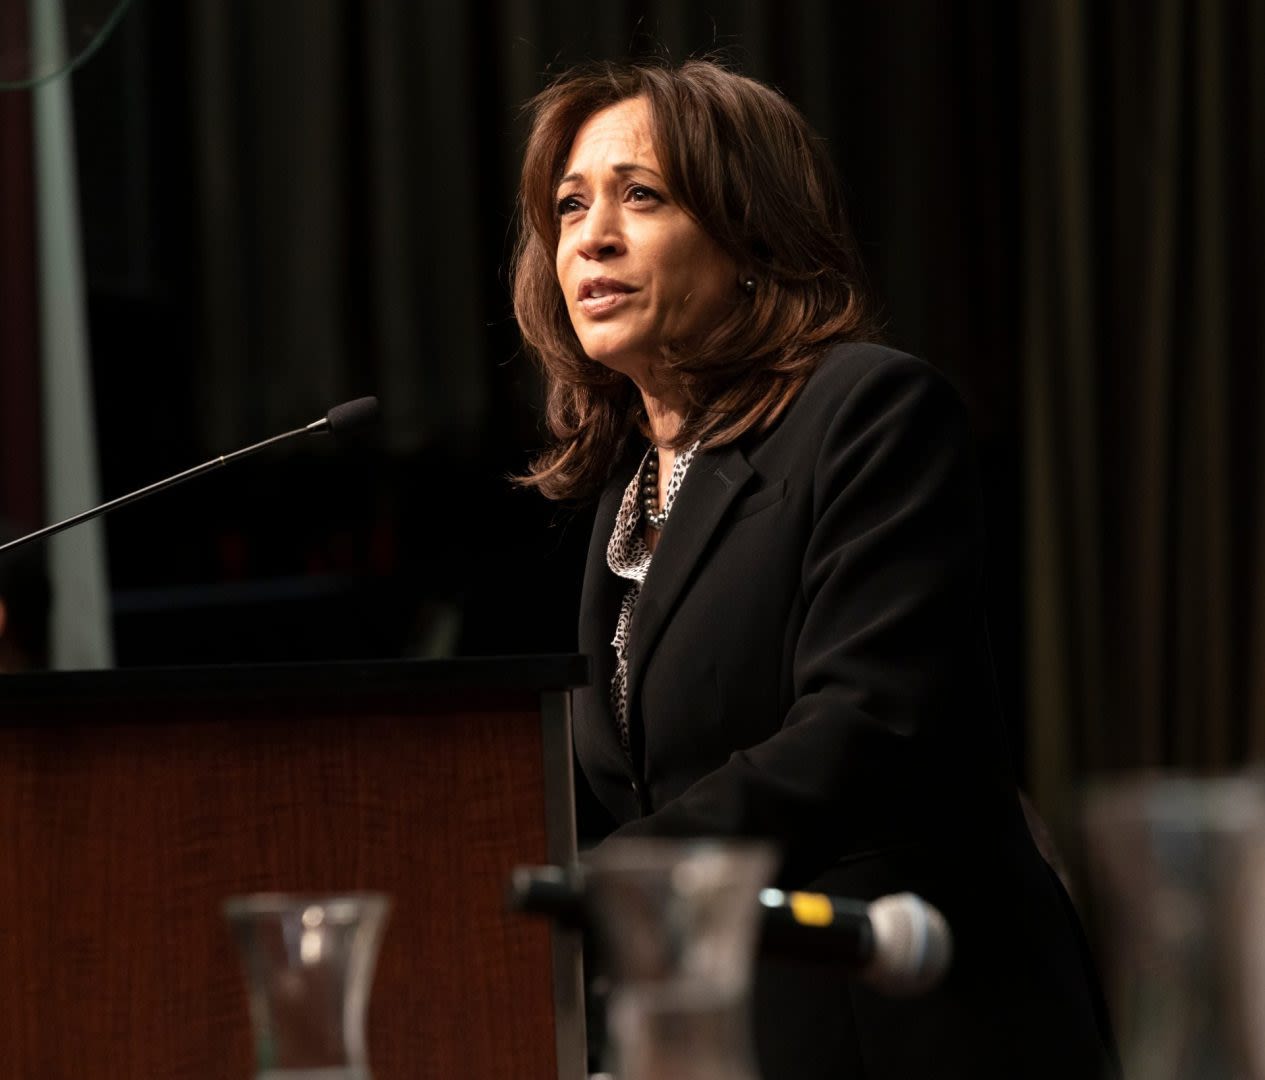 Vice President Kamala Harris breaks down barriers with candor and engagement